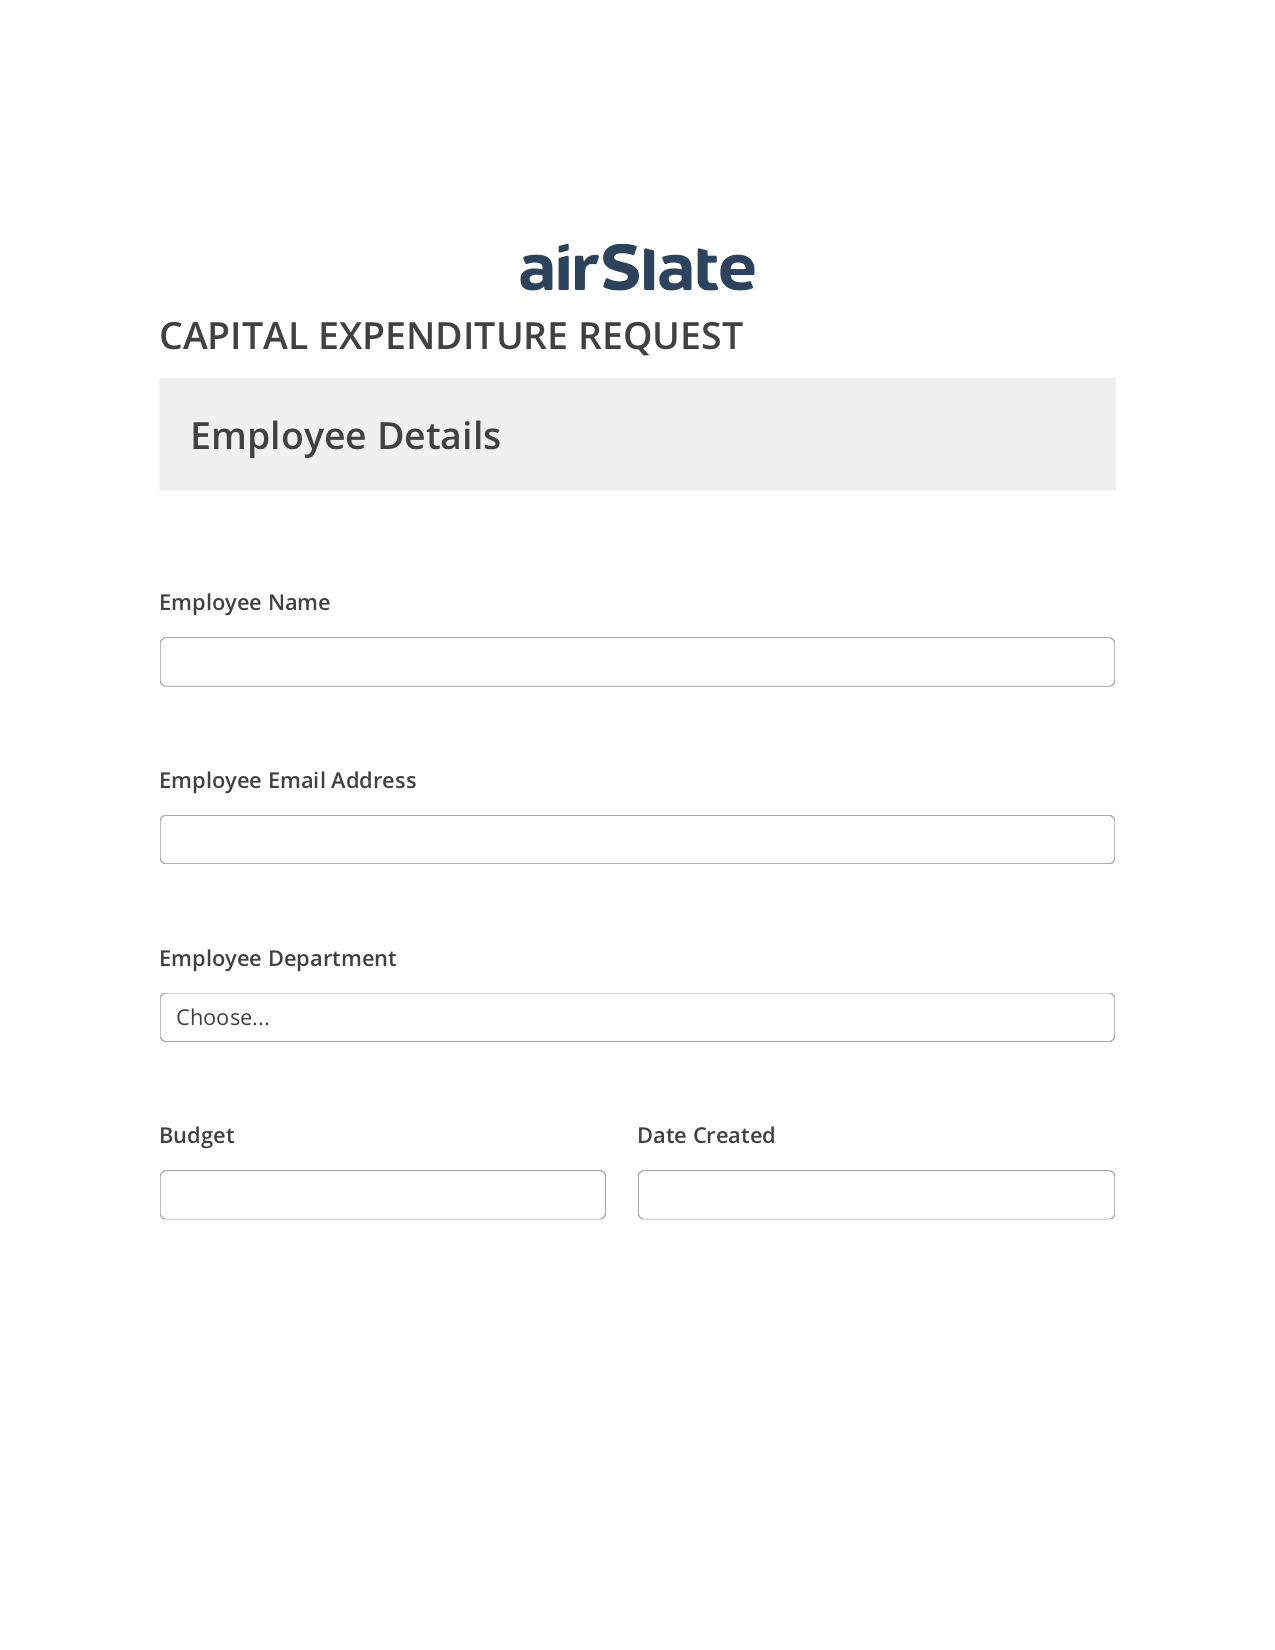 Capital Expenditure Request Approval Workflow Pre-fill from Google Sheet Dropdown Options Bot, Update MS Dynamics 365 Record Bot, Post-finish Document Bot